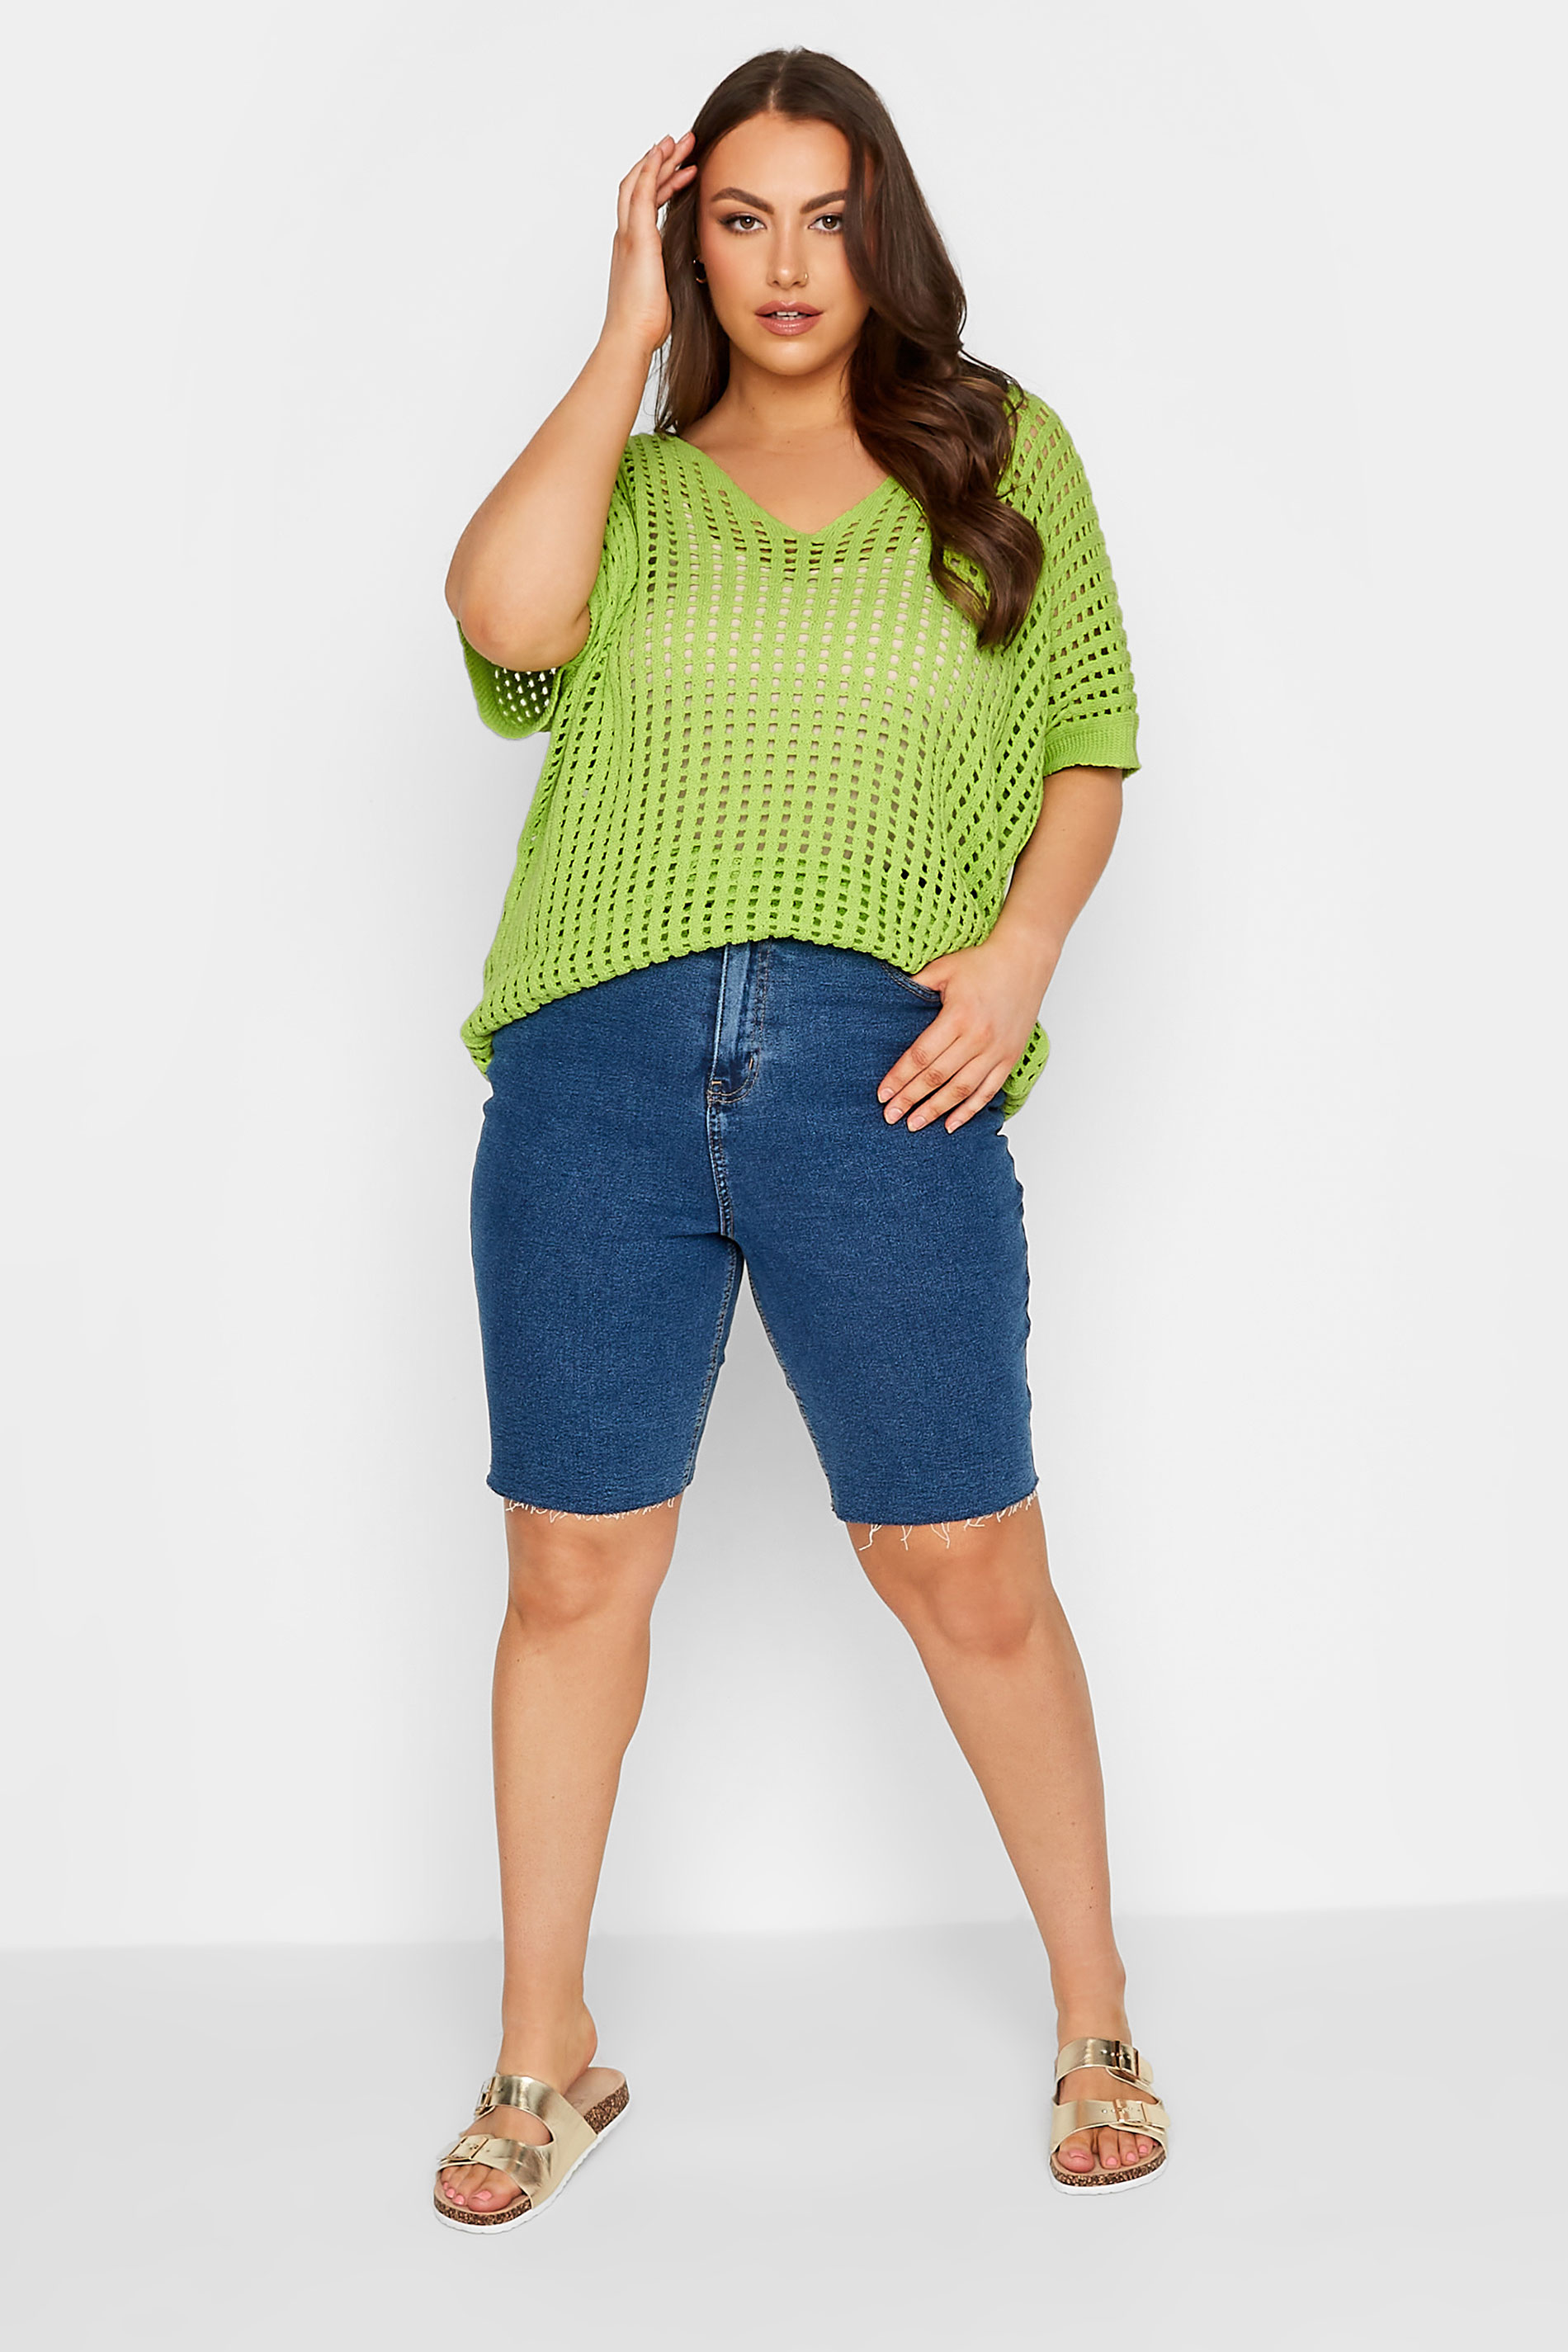 YOURS Plus Size Green Crochet Top | Yours Clothing 3